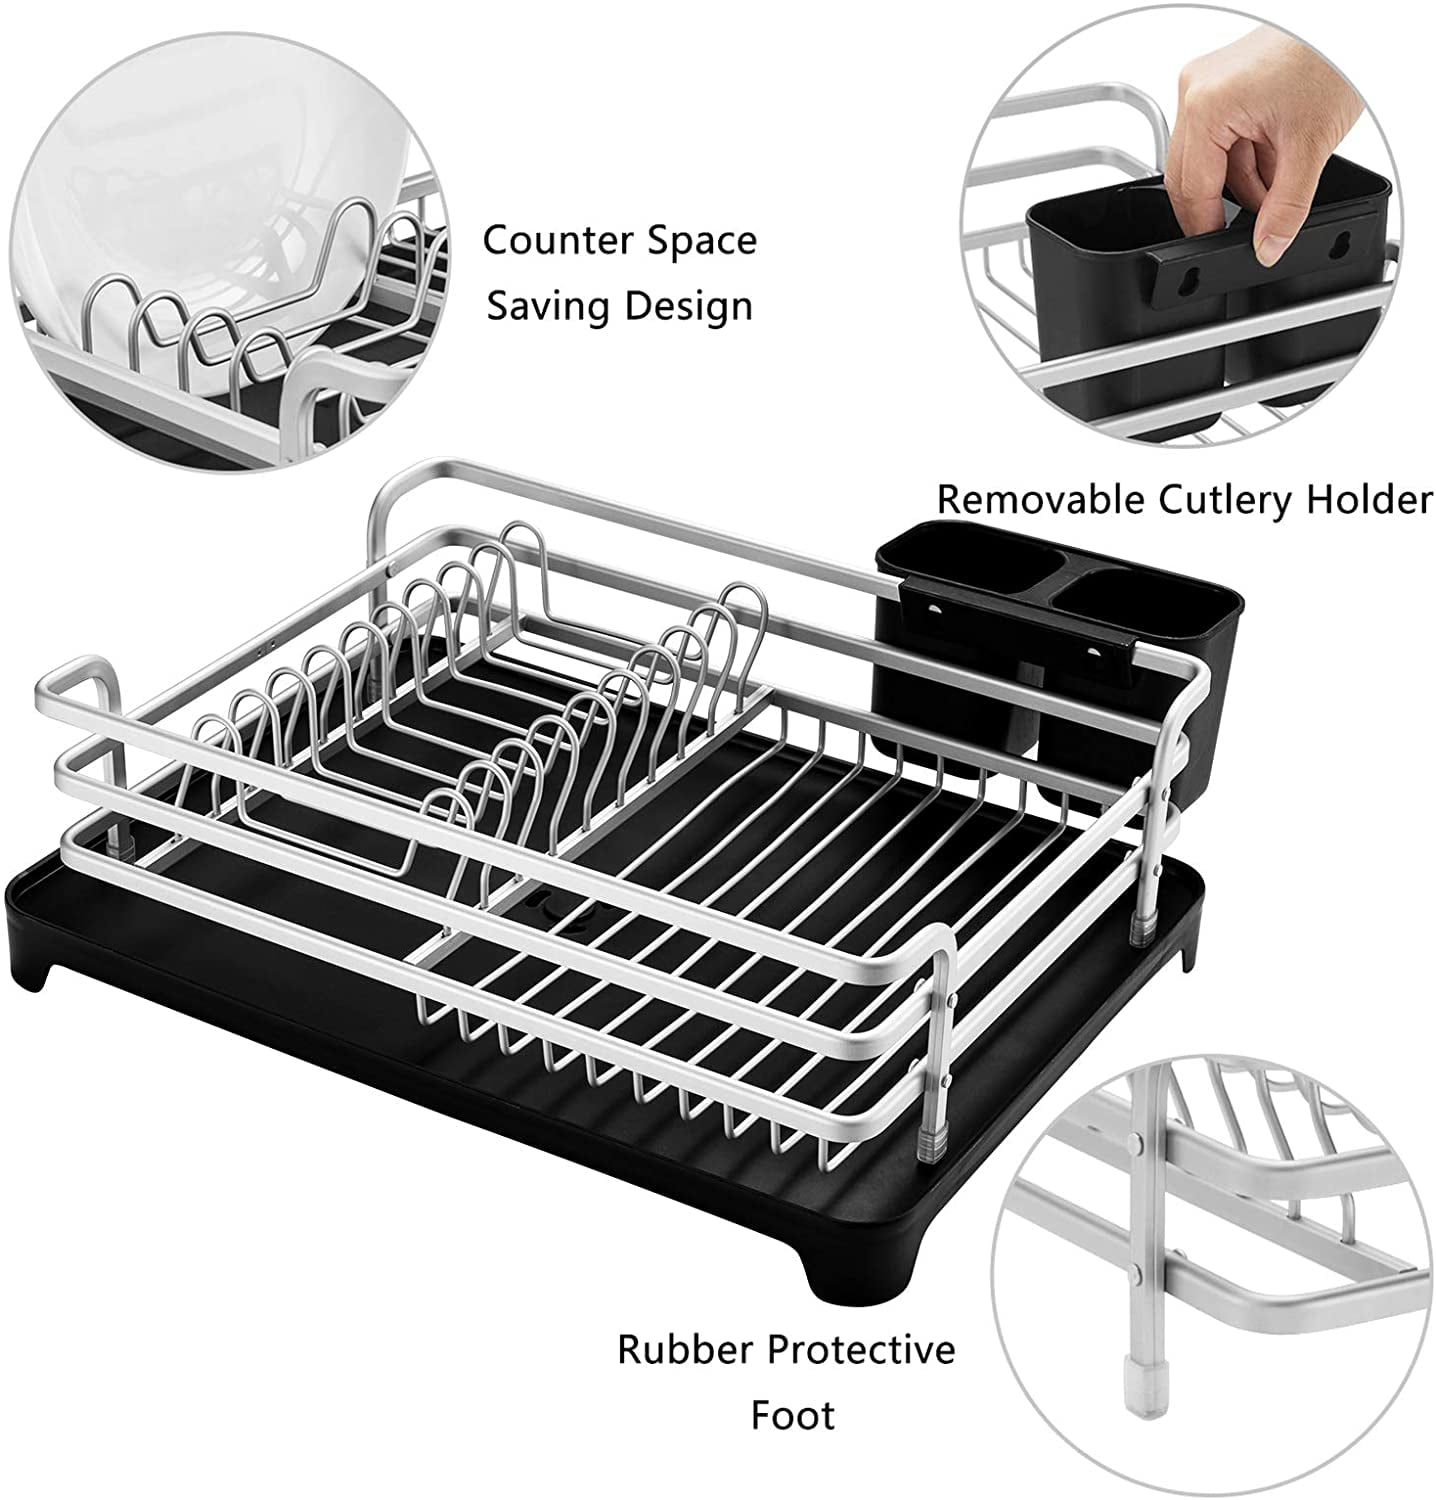 FlexiDry™ Y-Type Stainless Steel Movable Drying Rack with Wheels – Home  Hero Shop